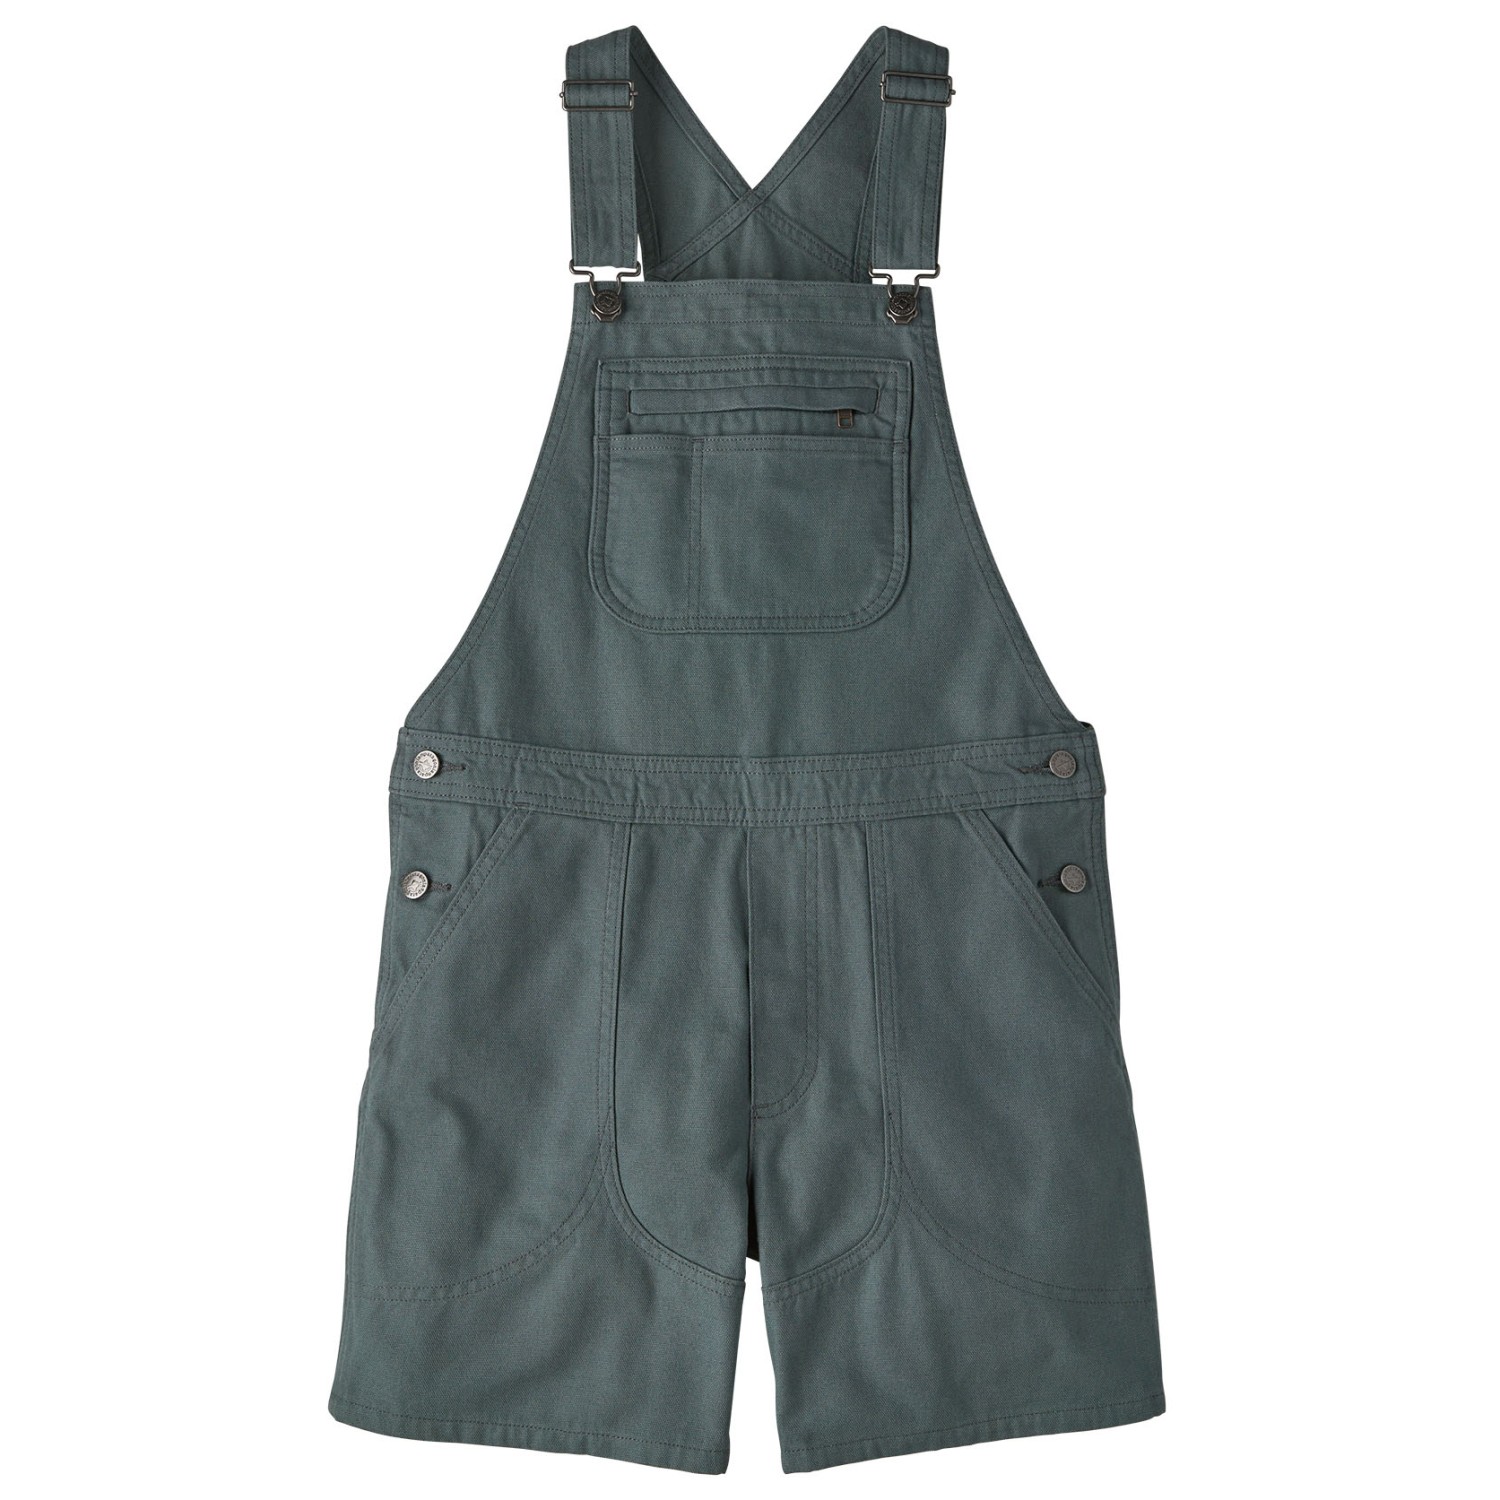 Шорты Patagonia Women's Stand Up Overalls, цвет Nouveau Green шорты patagonia patagonia stand up 7 in